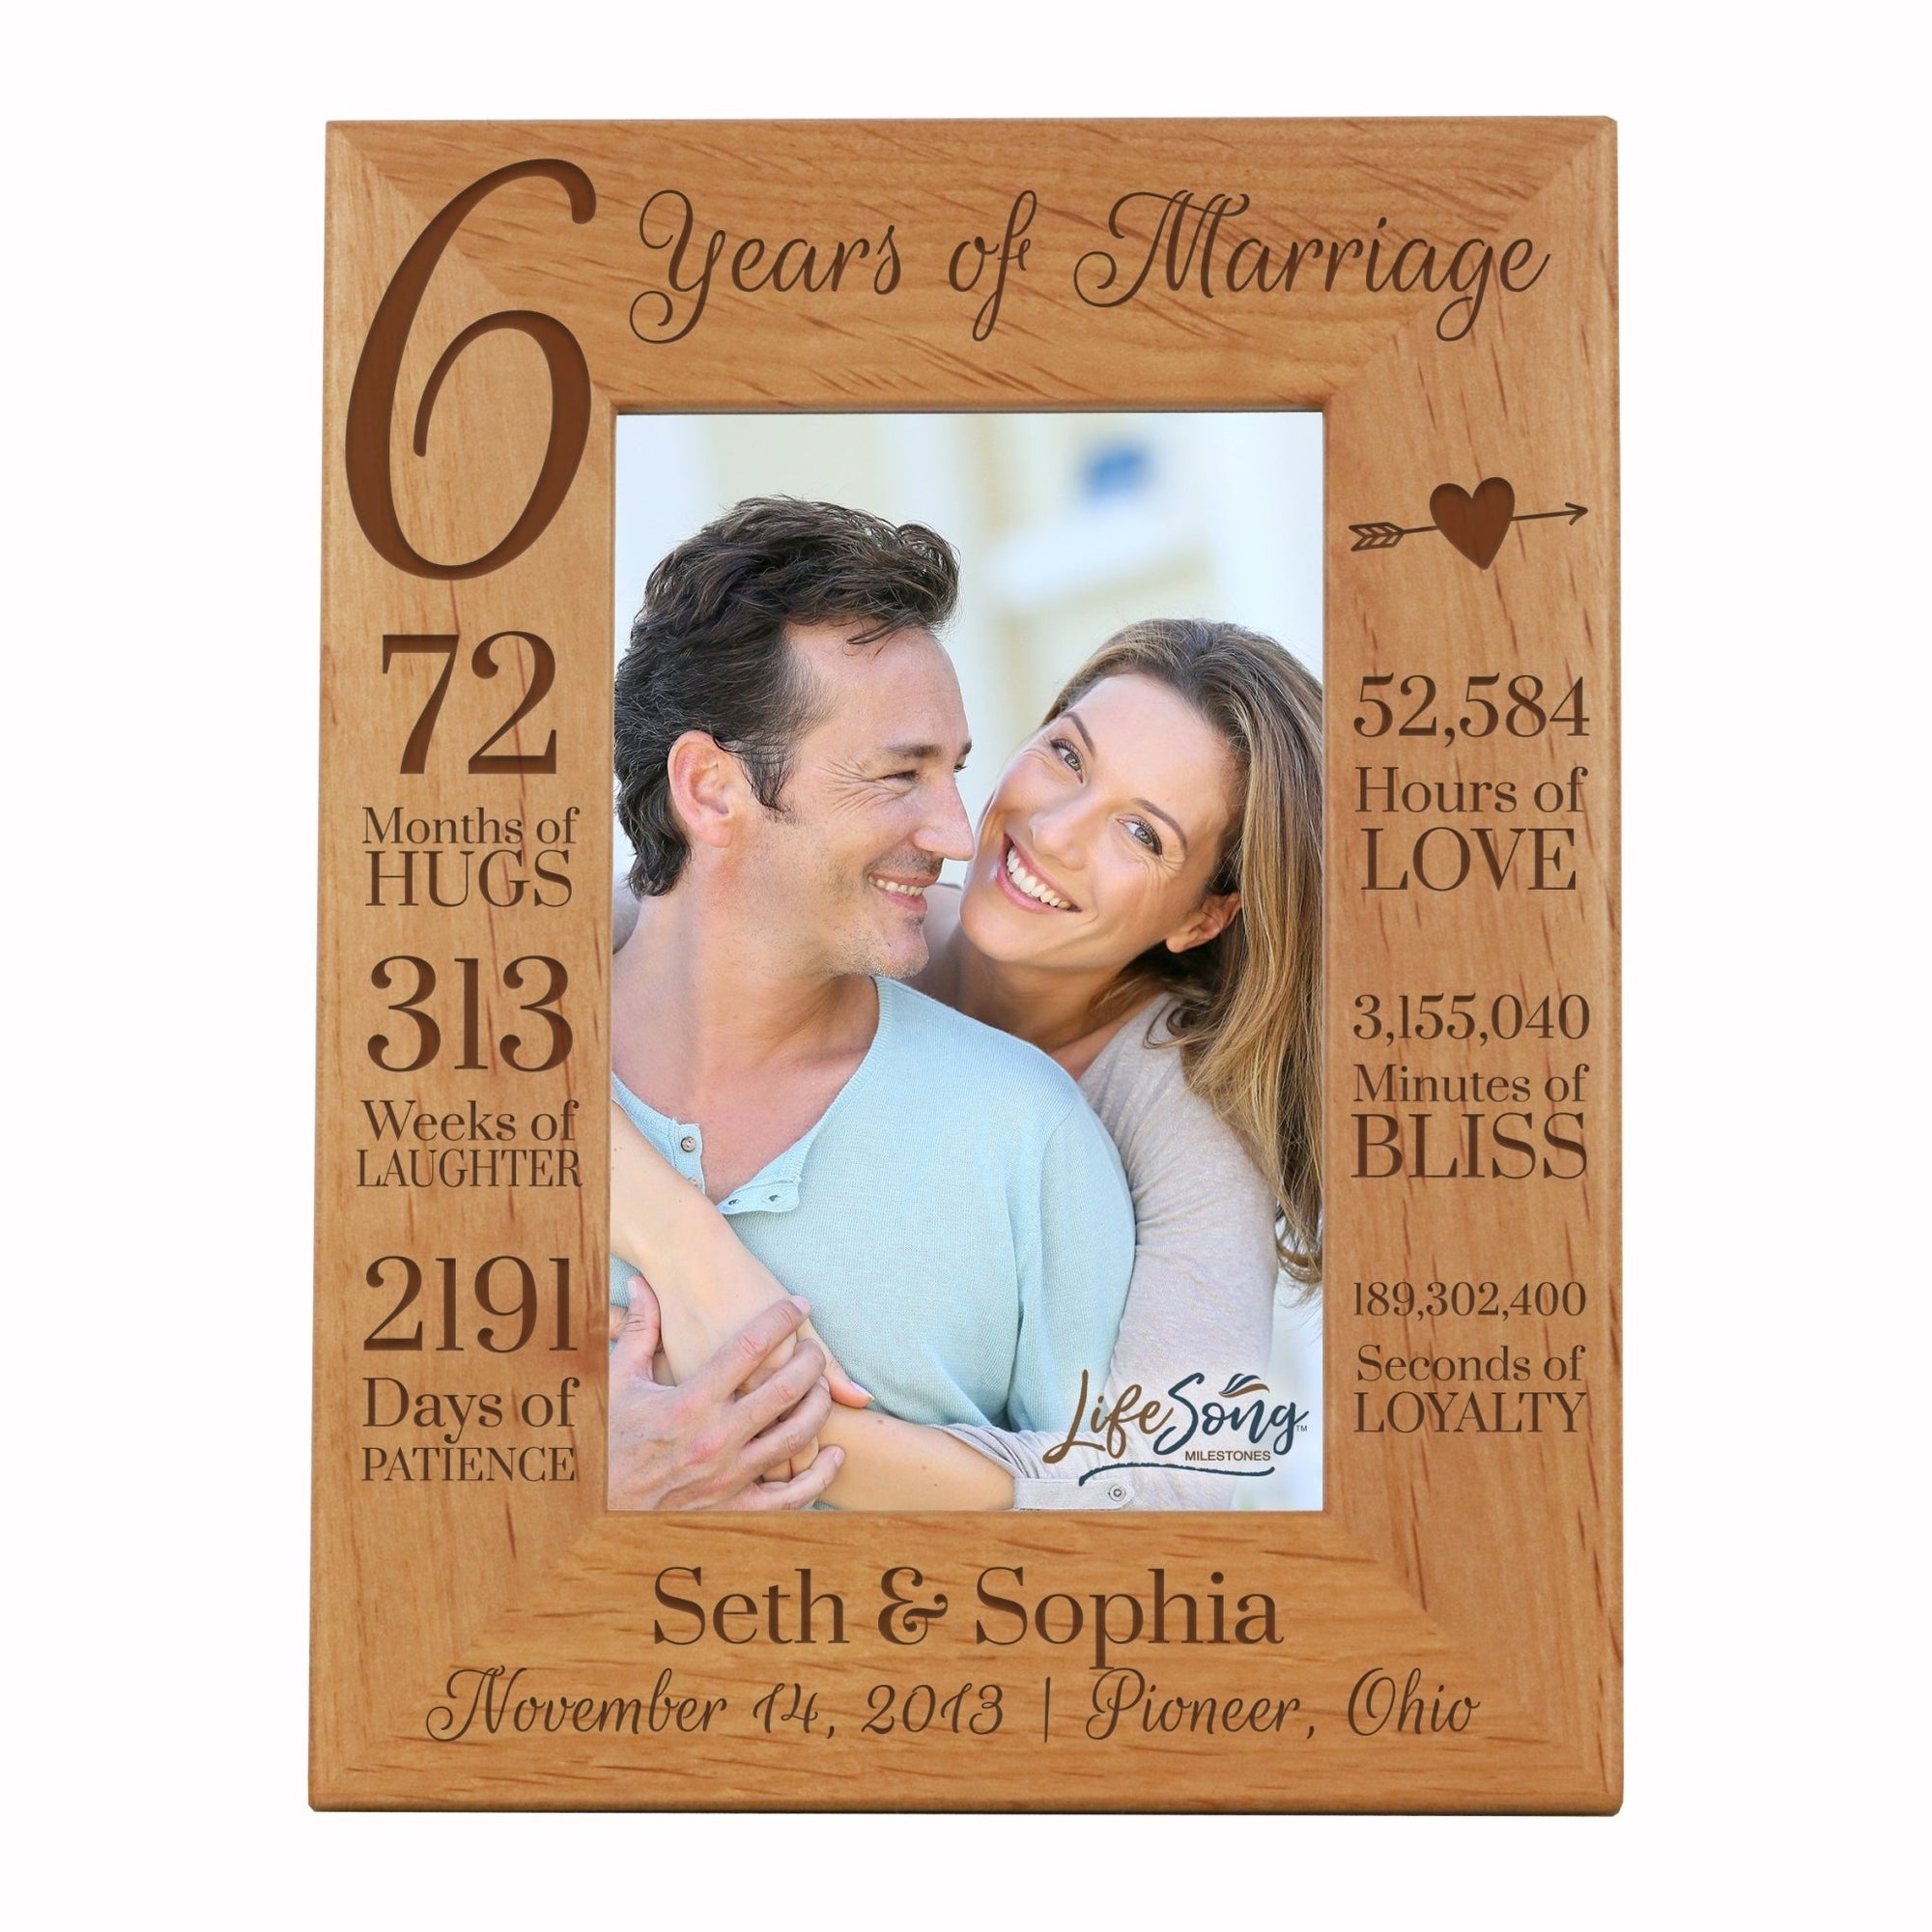 Lifesong Milestones Personalized Engraved 6th Wedding Anniversary Photo Frame Wall Decor Gift for Couples